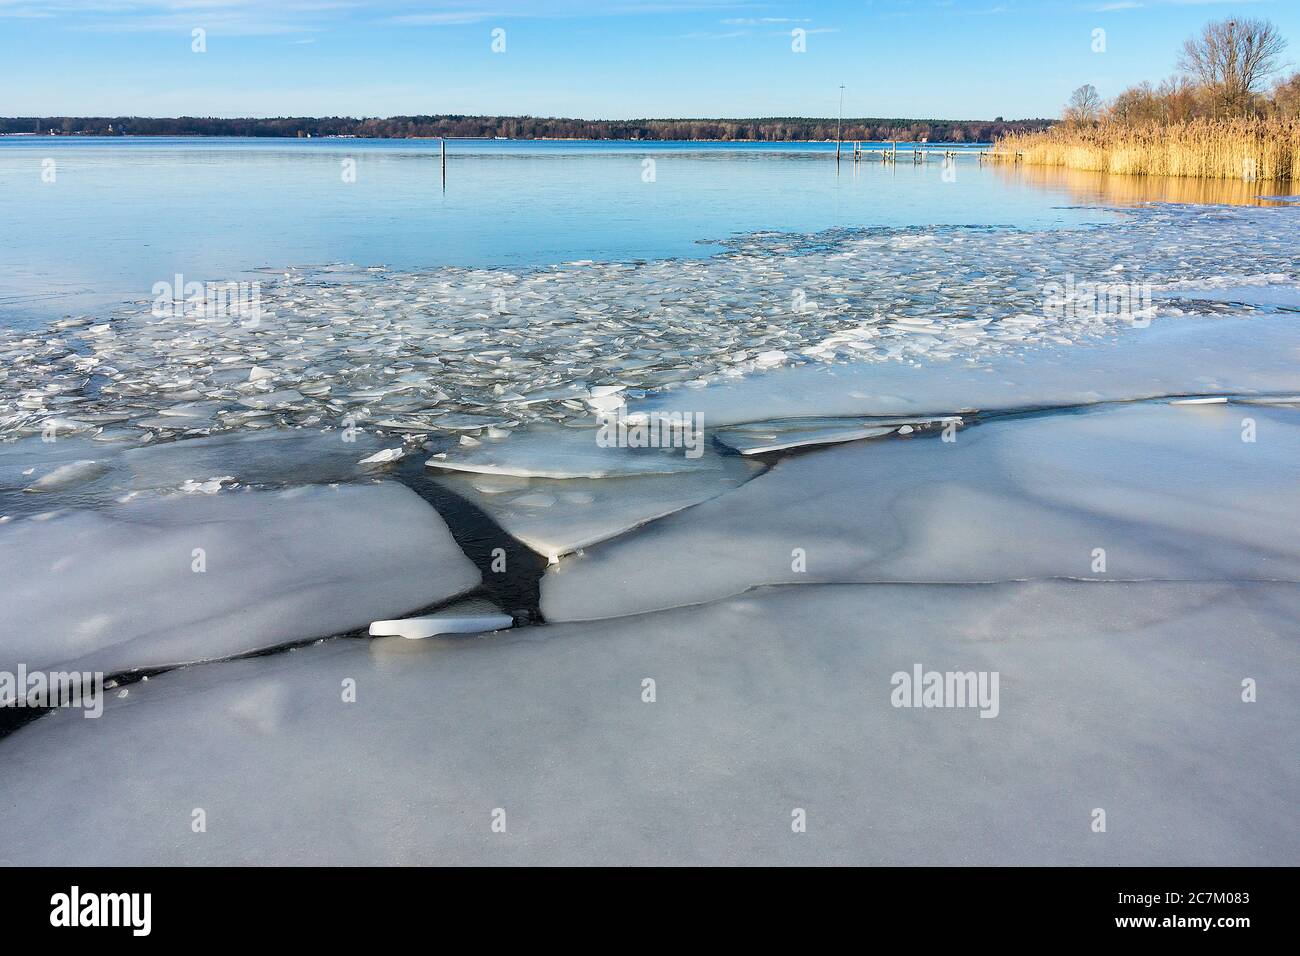 Berlin, Wannsee, icy riparian zone Stock Photo